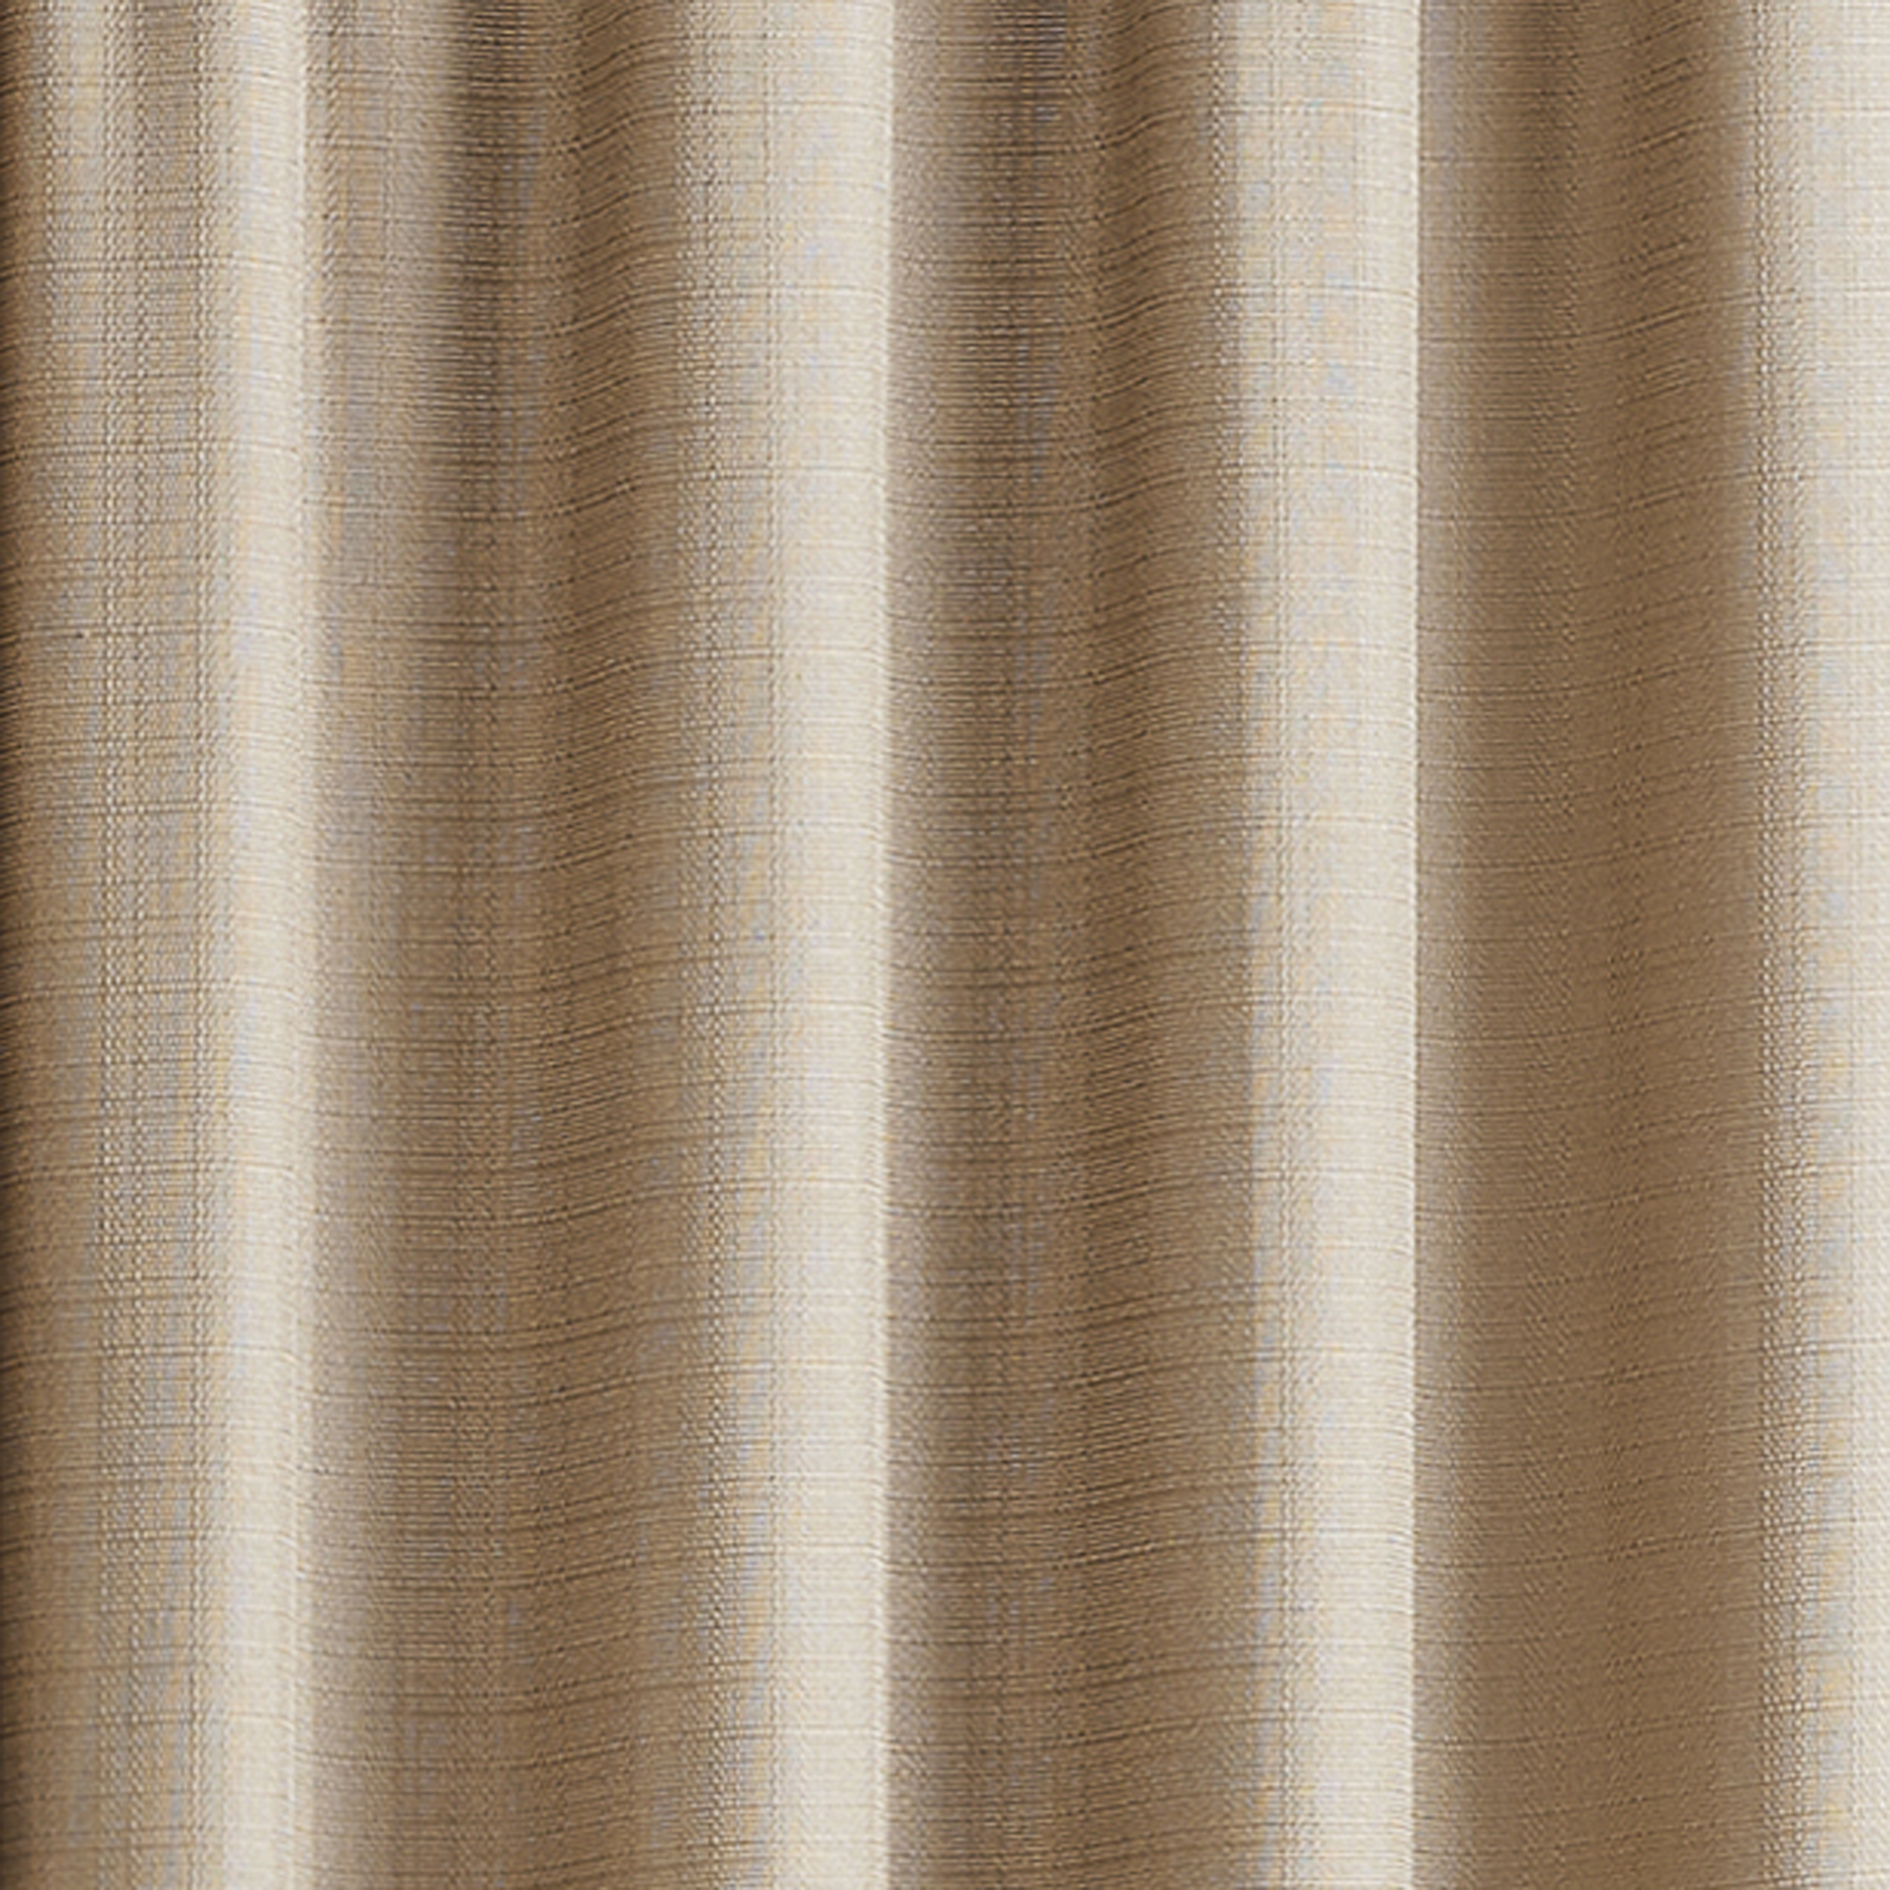 Mainstays Southport Beige Solid Color Light Filtering Rod Pocket Curtain Panel Pair, 40" x 63" - image 4 of 9